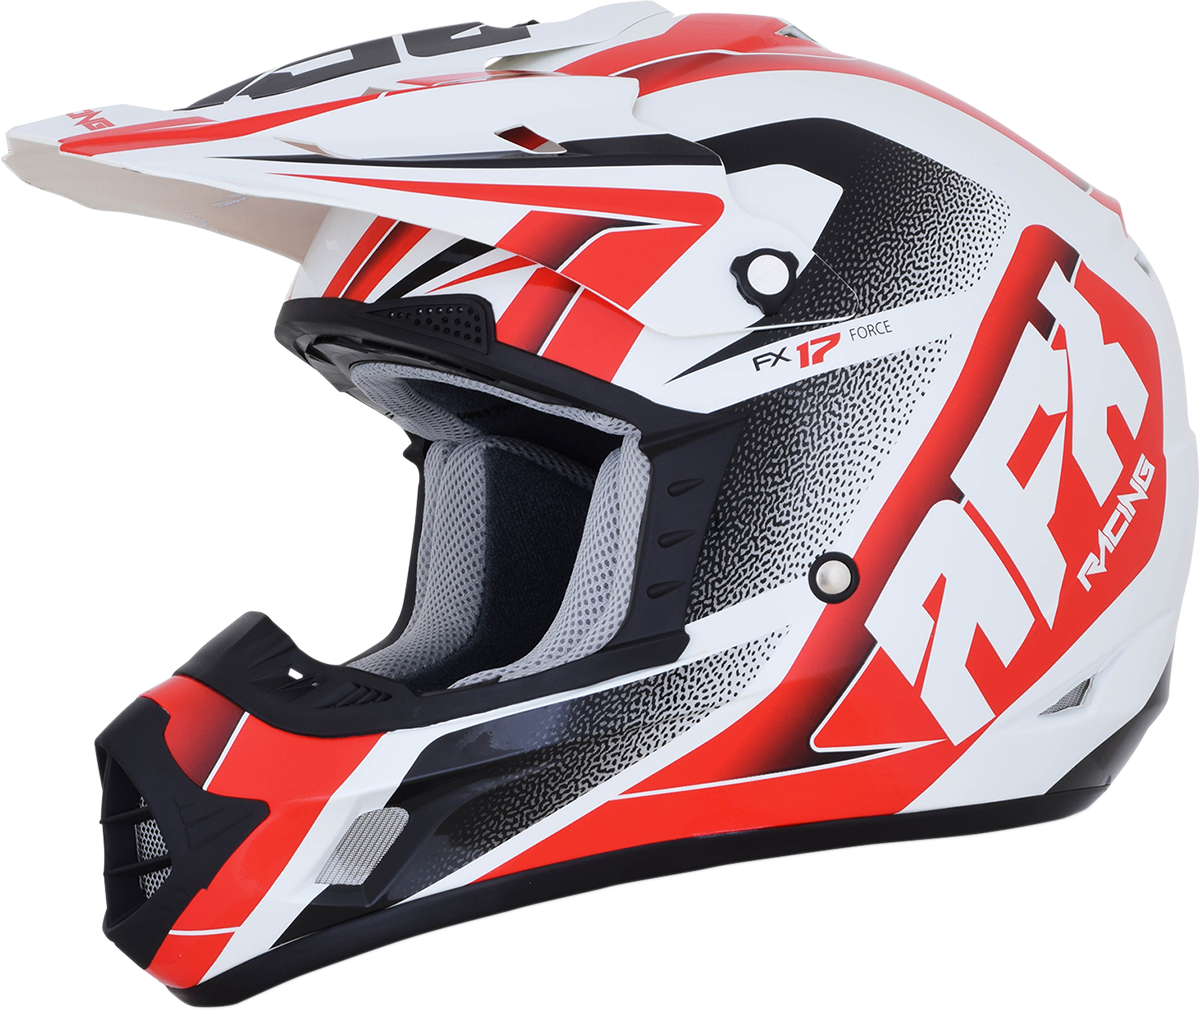 AFX FX-17 Helmet - Force - Pearl White/Red - Large 0110-5246